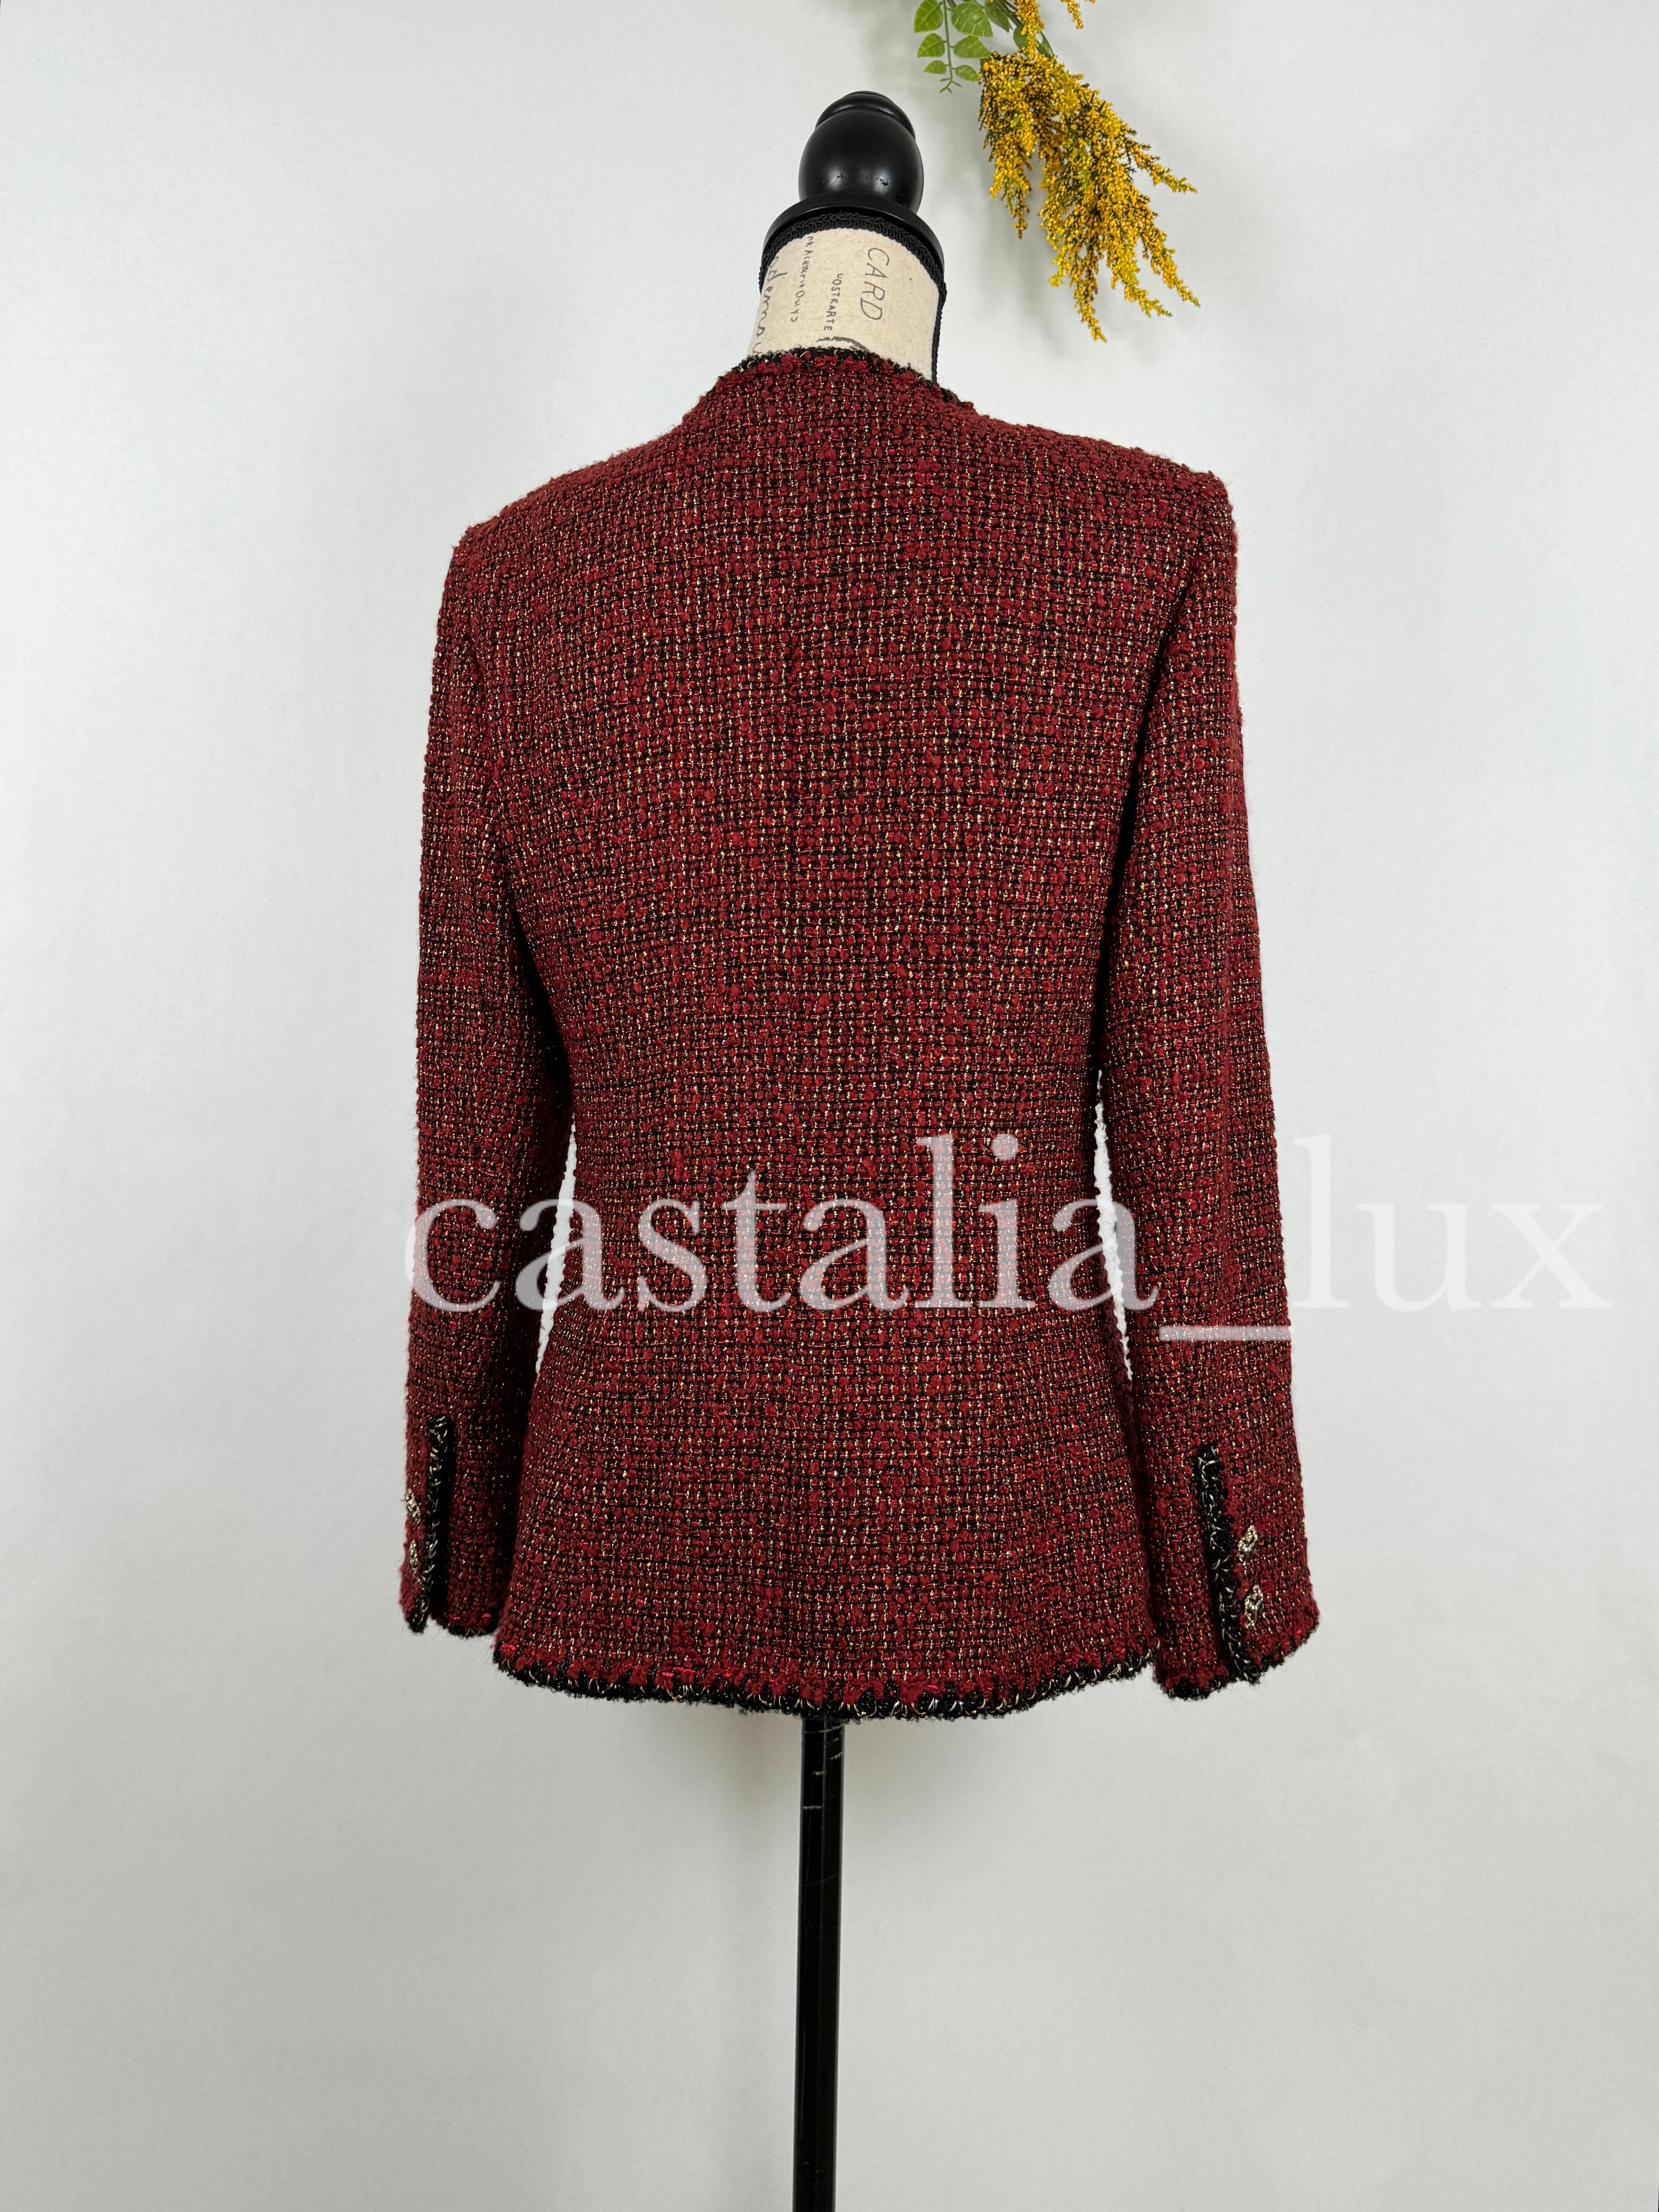 Chanel New Iconic CC Jewel Buttons Lesage Tweed Jacket 16